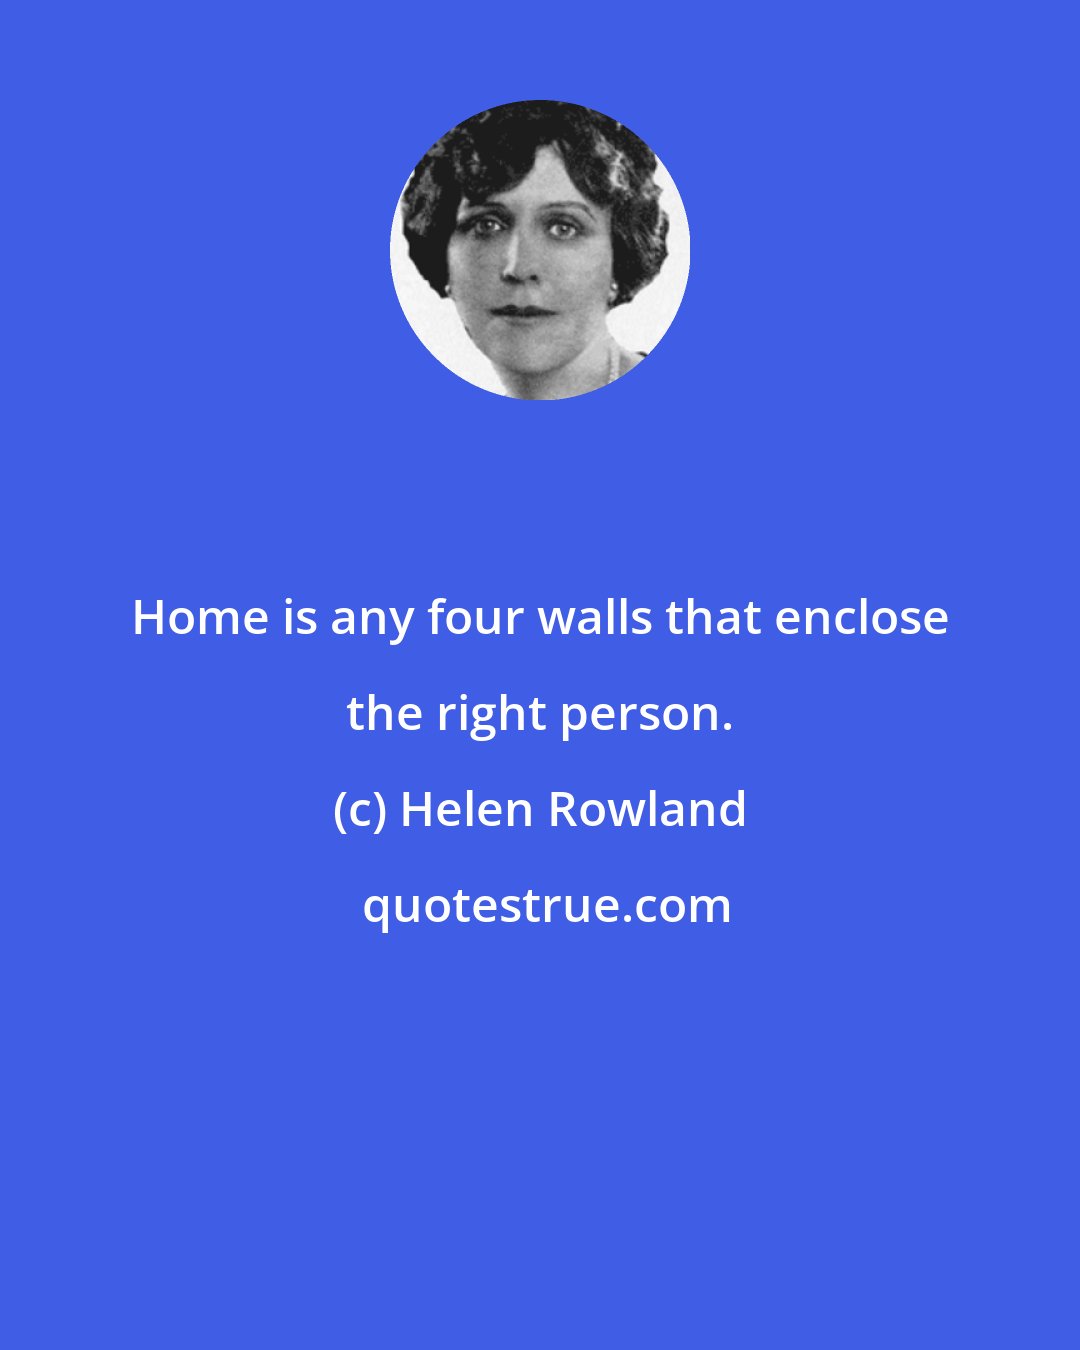 Helen Rowland: Home is any four walls that enclose the right person.